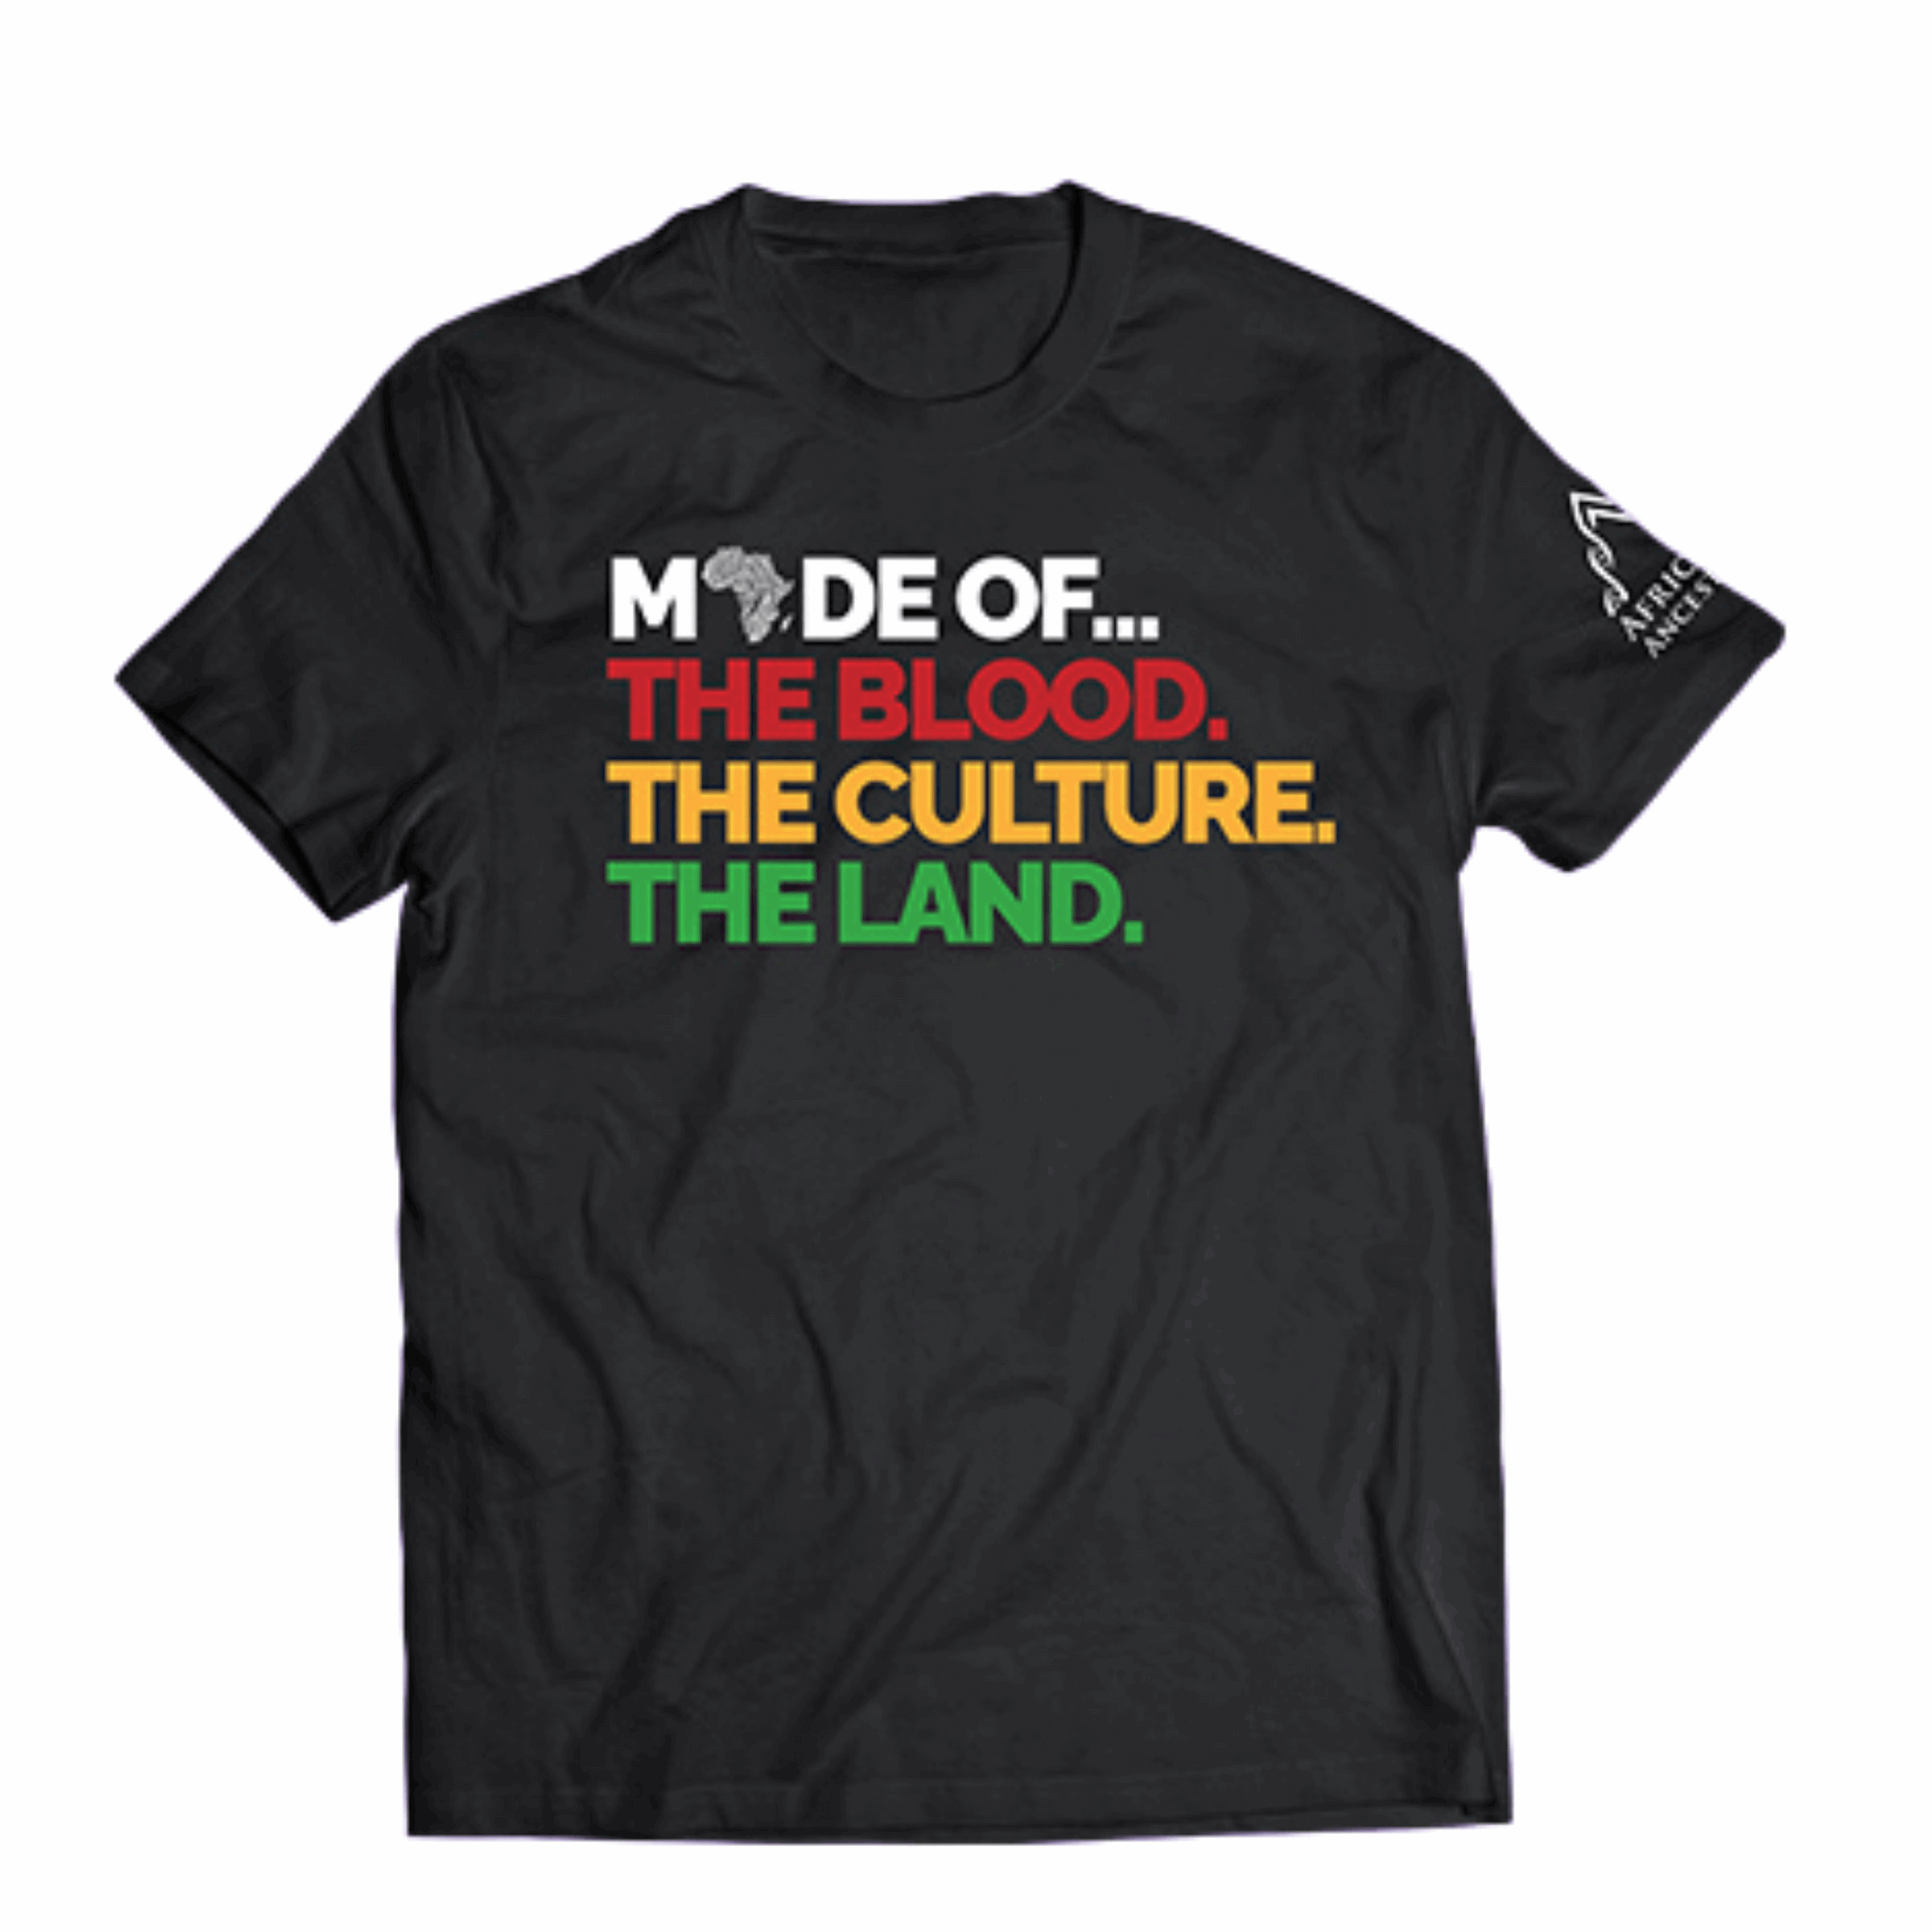 Made Of...T-shirt in Black with "The Blood", "The Culture", "The Land" written under "Made Of""